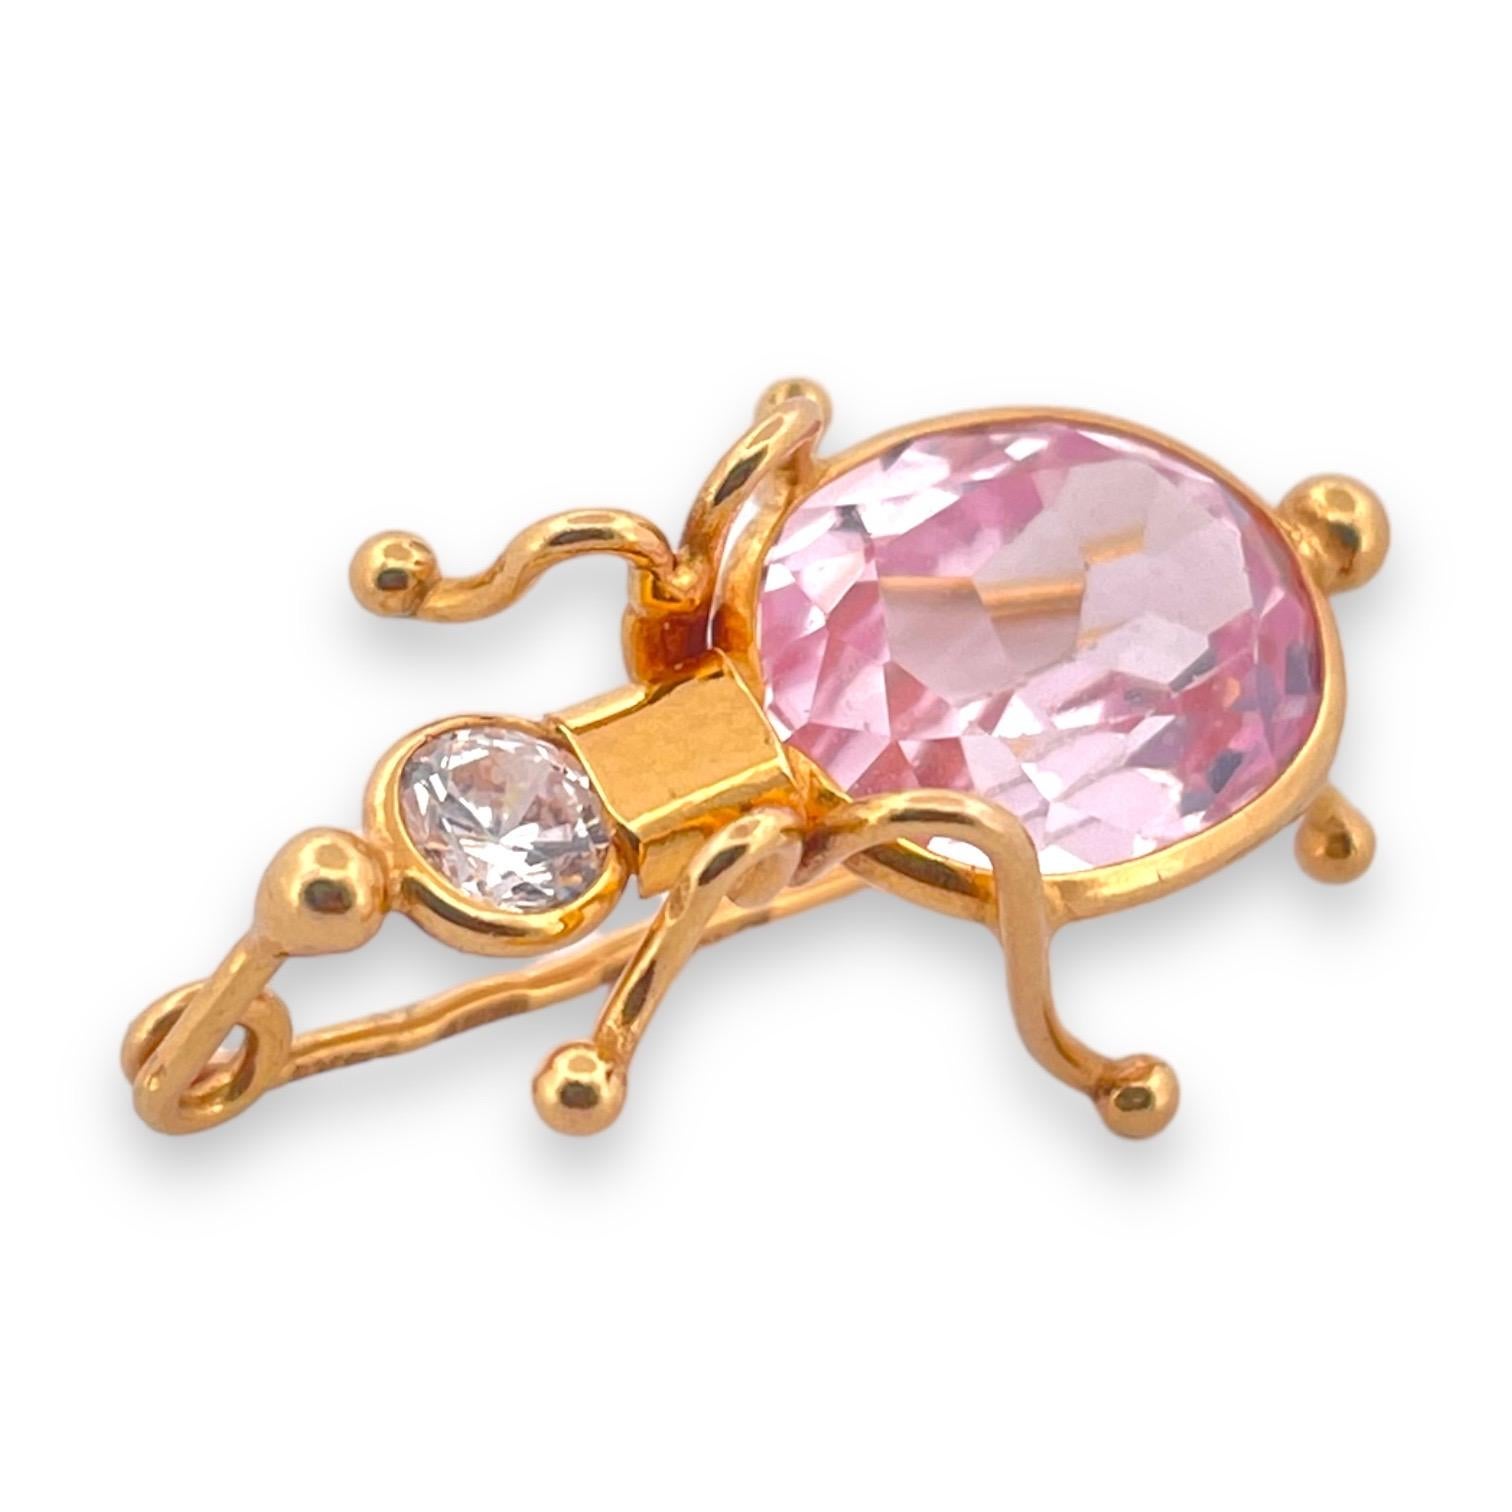 Experience the playful charm of our Whimsical Kunzite & White Sapphire Bug Brooch, a true treasure crafted from gleaming 14K yellow gold. This enchanting brooch is adorned with a soft pink kunzite, exuding a gentle sophistication, while the